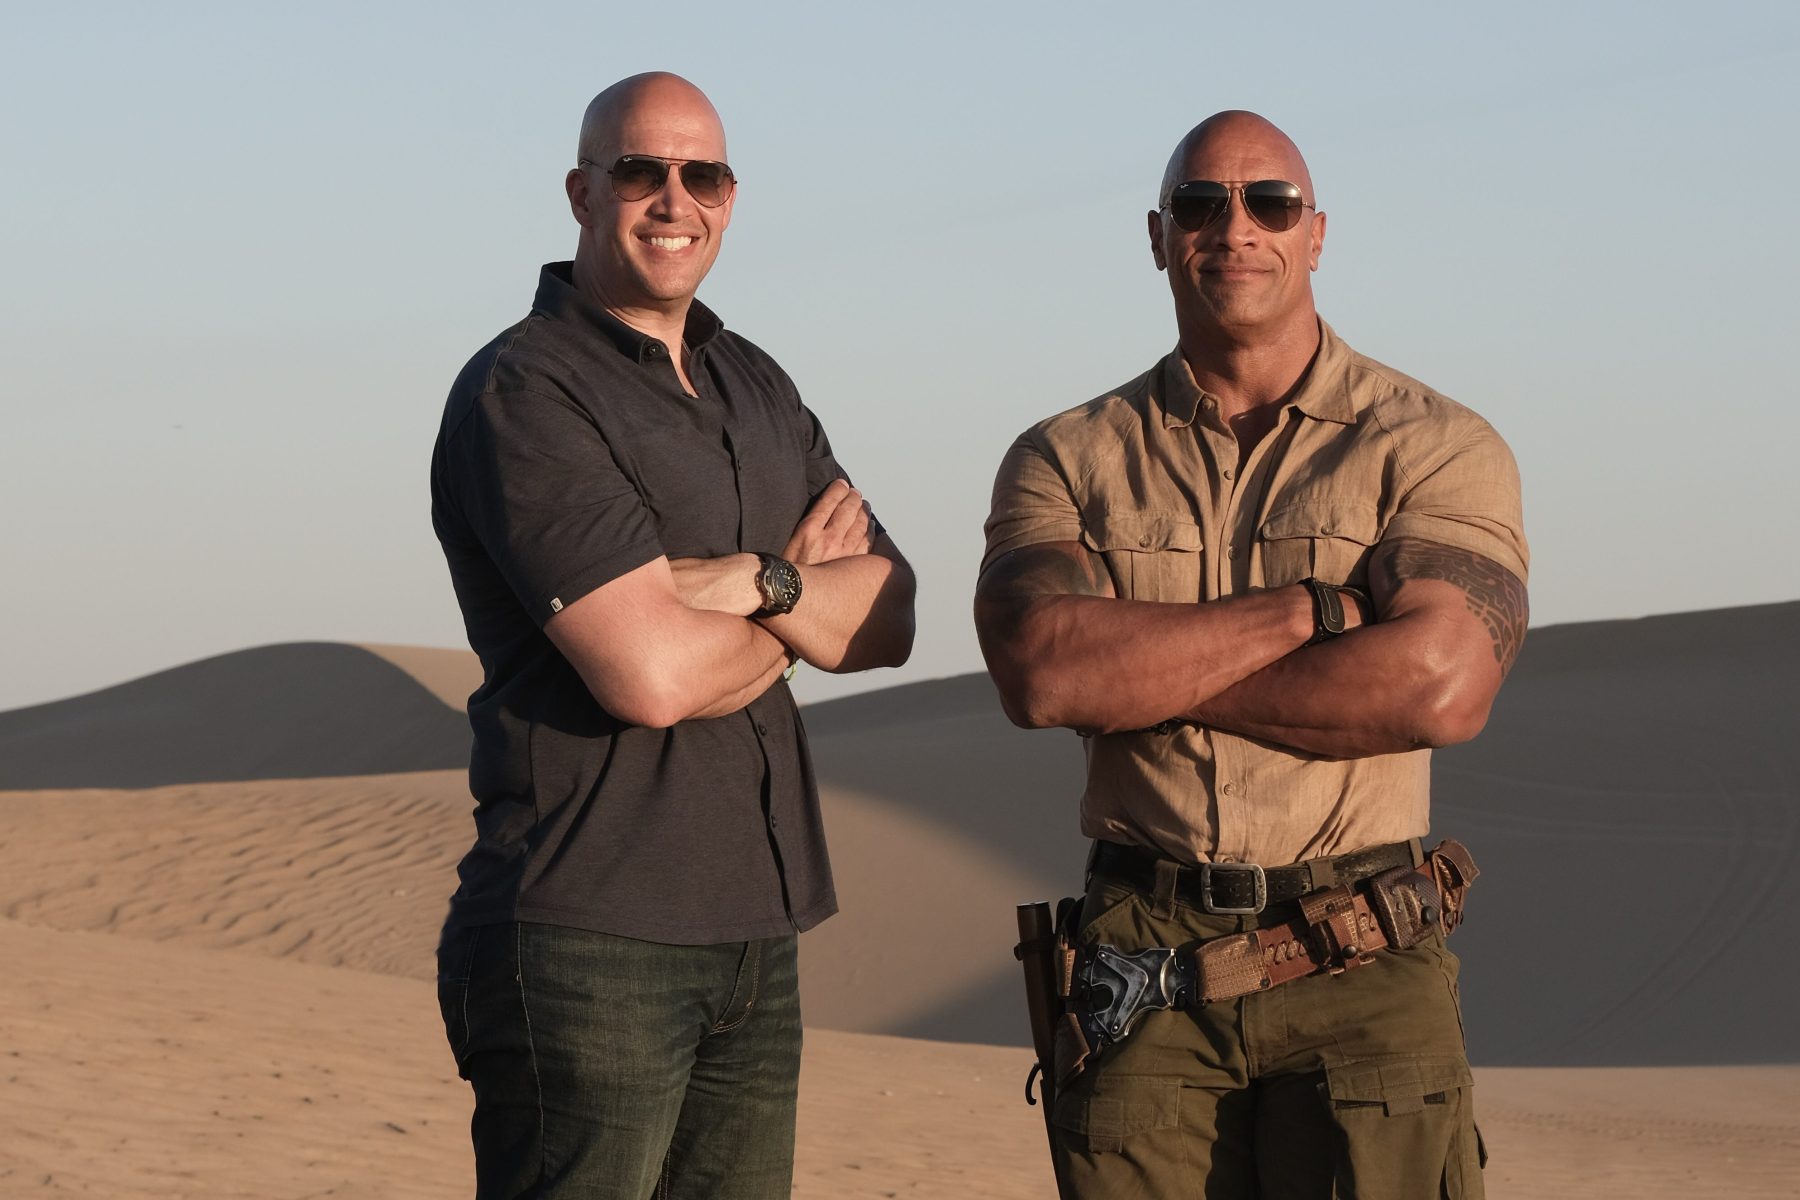 <p><span style="font-weight: 400">Hiram Garcia first met Dwayne “The Rock” Johnson when he was 15 years old and Johnson was dating his sister. While it didn’t work out between the couple, Garcia and Johnson formed a lingering bond and are now producing partners via Seven Bucks Productions. As president of production at Seven Bucks, Garcia has unprecedented access to capture images of his famous friend on and off set. He began putting that access to use when Johnson was filming </span><i><span style="font-weight: 400">Baywatch,</span></i><span style="font-weight: 400"> </span><i><span style="font-weight: 400">Fast and Furious 8</span></i><span style="font-weight: 400"> and </span><i><span style="font-weight: 400">Jumanji: Welcome to the Jungle. "</span></i><span style="font-weight: 400">That run of three movies is where my photography really exploded, because I started to embrace it more, not only as a hobby, but as a tool to help drive the narrative for these films we were working on.” Those photos and many others are collected in </span><a href="https://bookshop.org/books/the-rock-through-the-lens-his-life-his-movies-his-world/9781250220424?aid=6018"><i><span style="font-weight: 400">The Rock: Through the Lens: His Life, His Movies, His World</span></i></a> <span style="font-weight: 400">from St. Martin’s Press. Herein: a preview of Garcia’s favorite images from the book, and the stories behind them.</span></p>